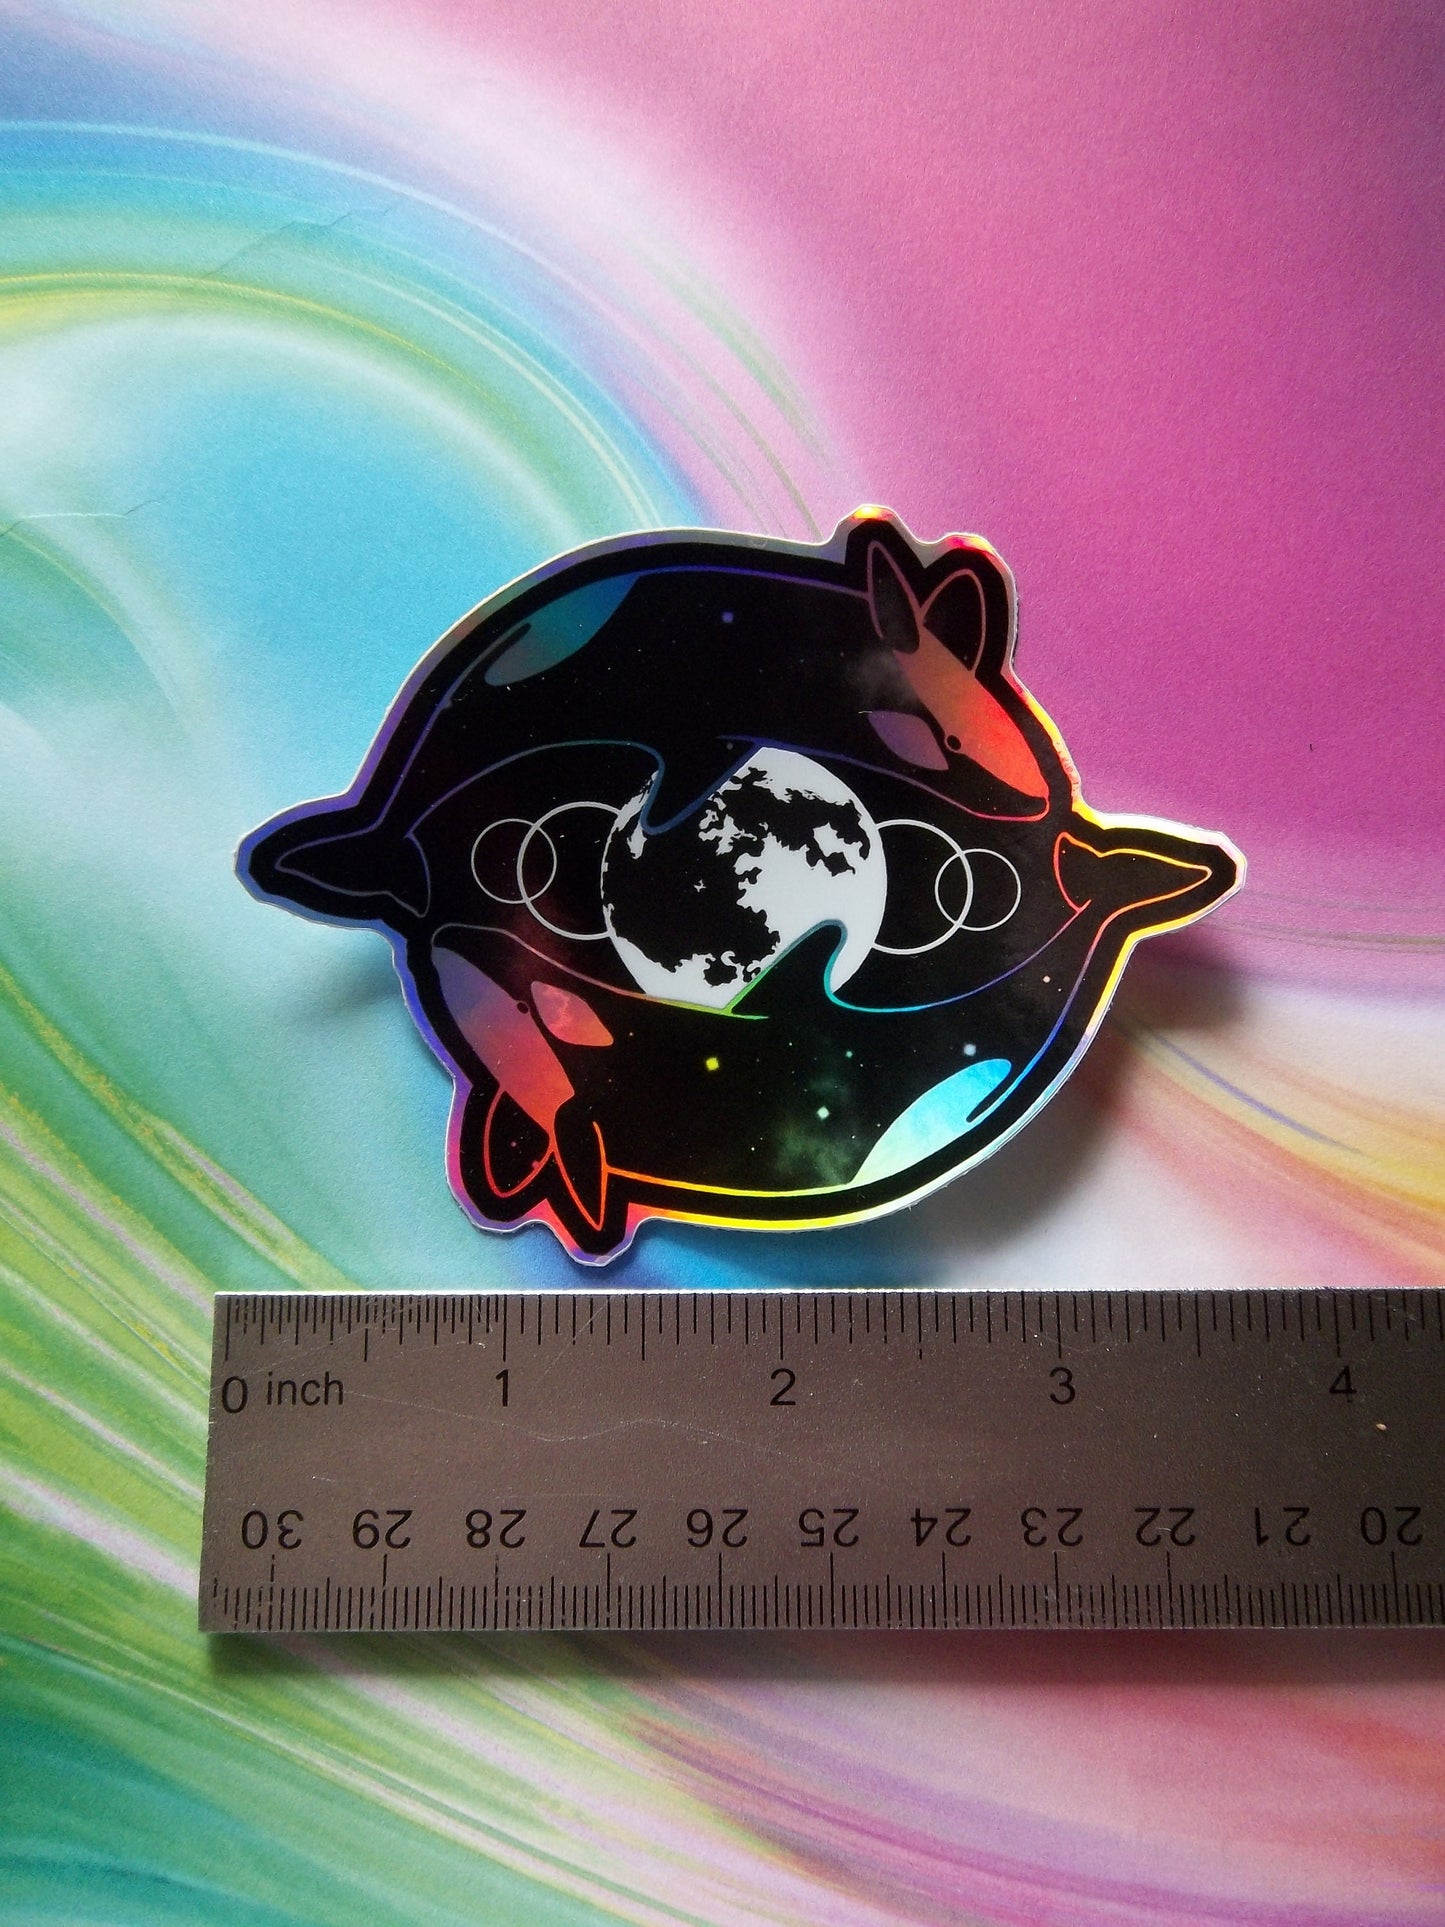 Orca Space Whales Sticker - 3" Holo Vinyl